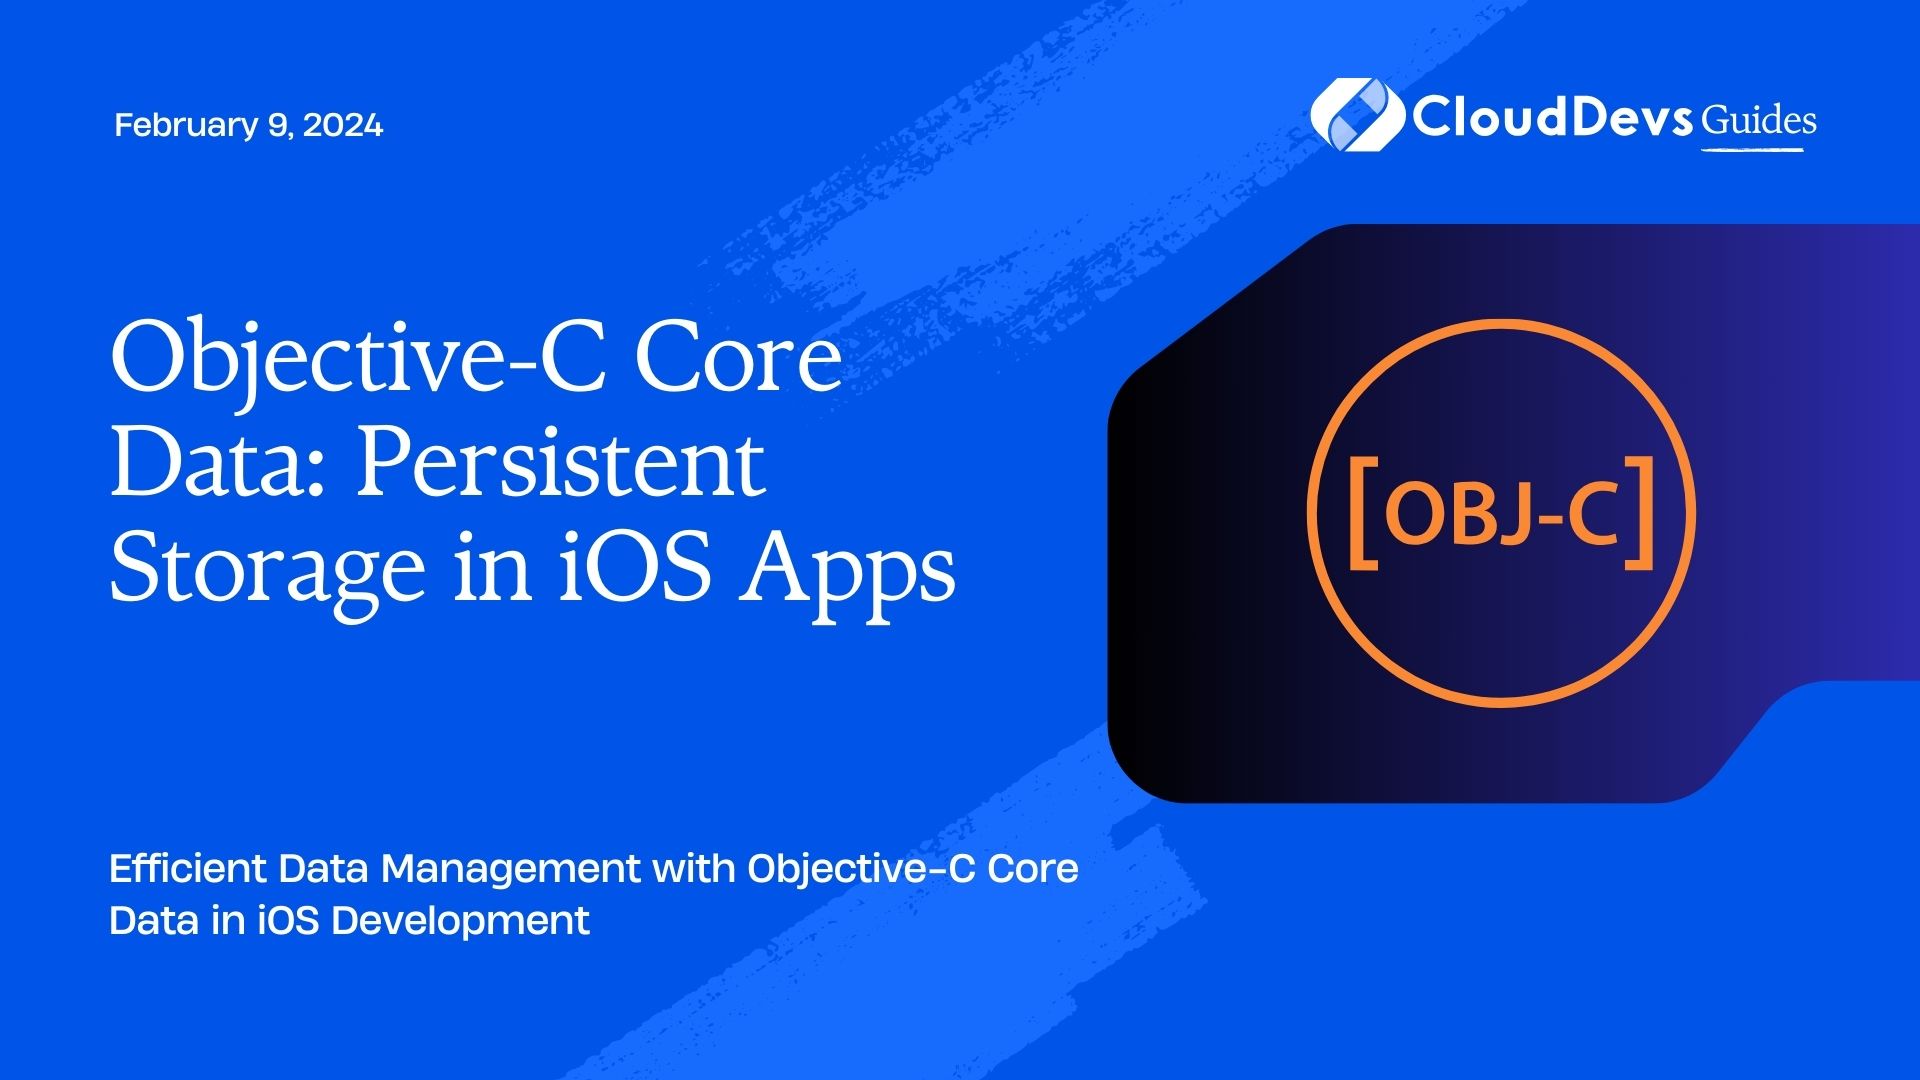 Objective-C Core Data: Persistent Storage in iOS Apps